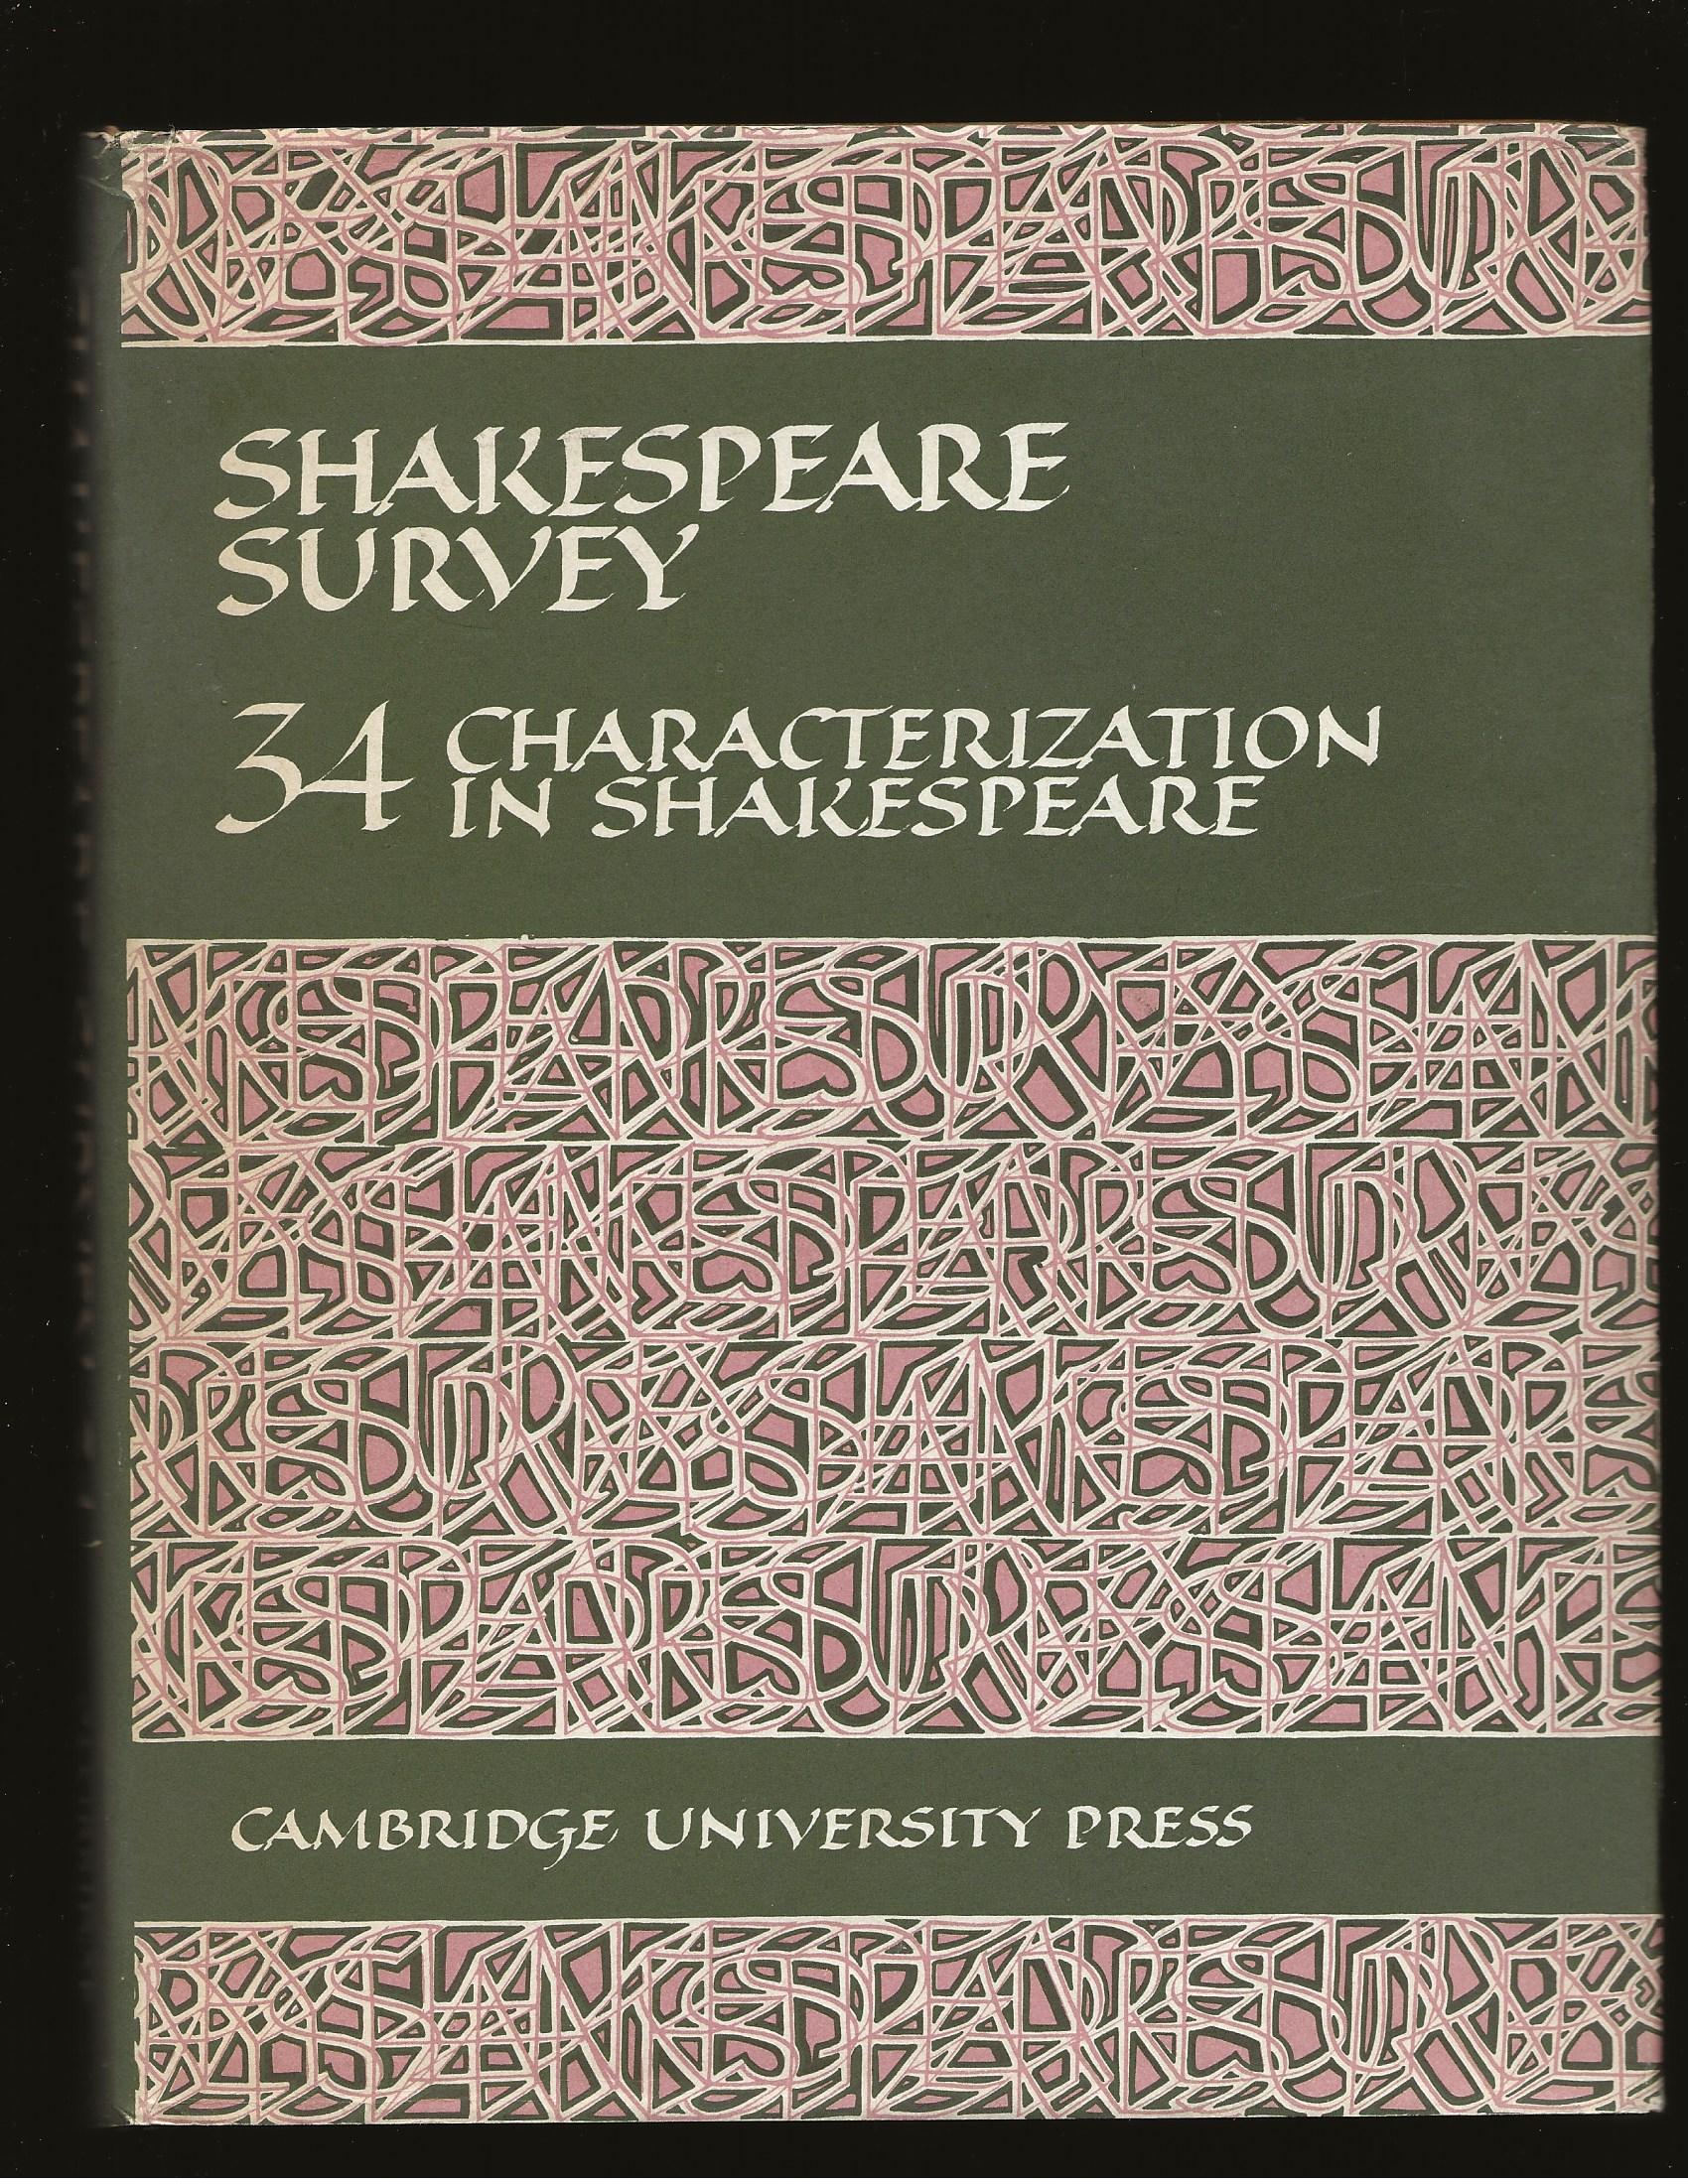 Shakespeare Survey: An Annual Survey of Shakespearean Study and Production (Number 34: Characterization in Shakespeare) - Edited by Stanley Wells